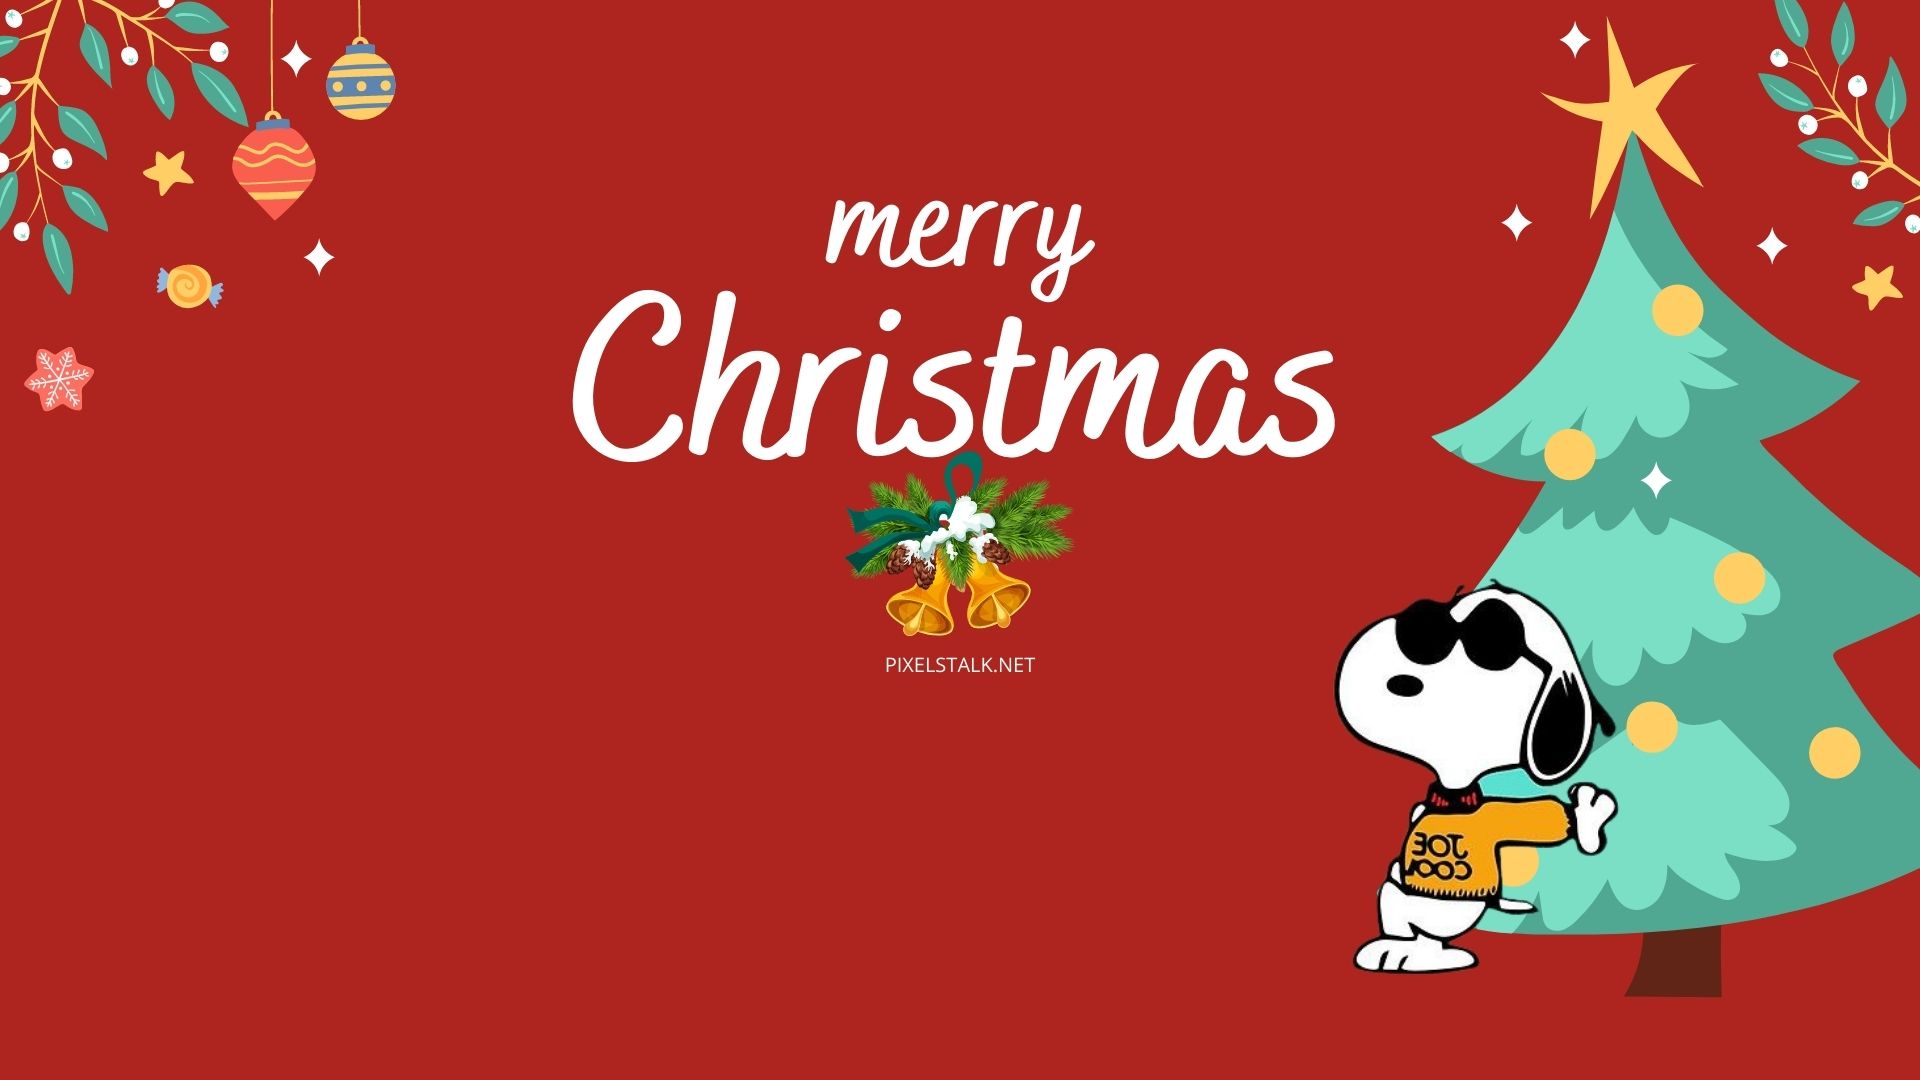 Snoopy Christmas Wallpapers Free Download 